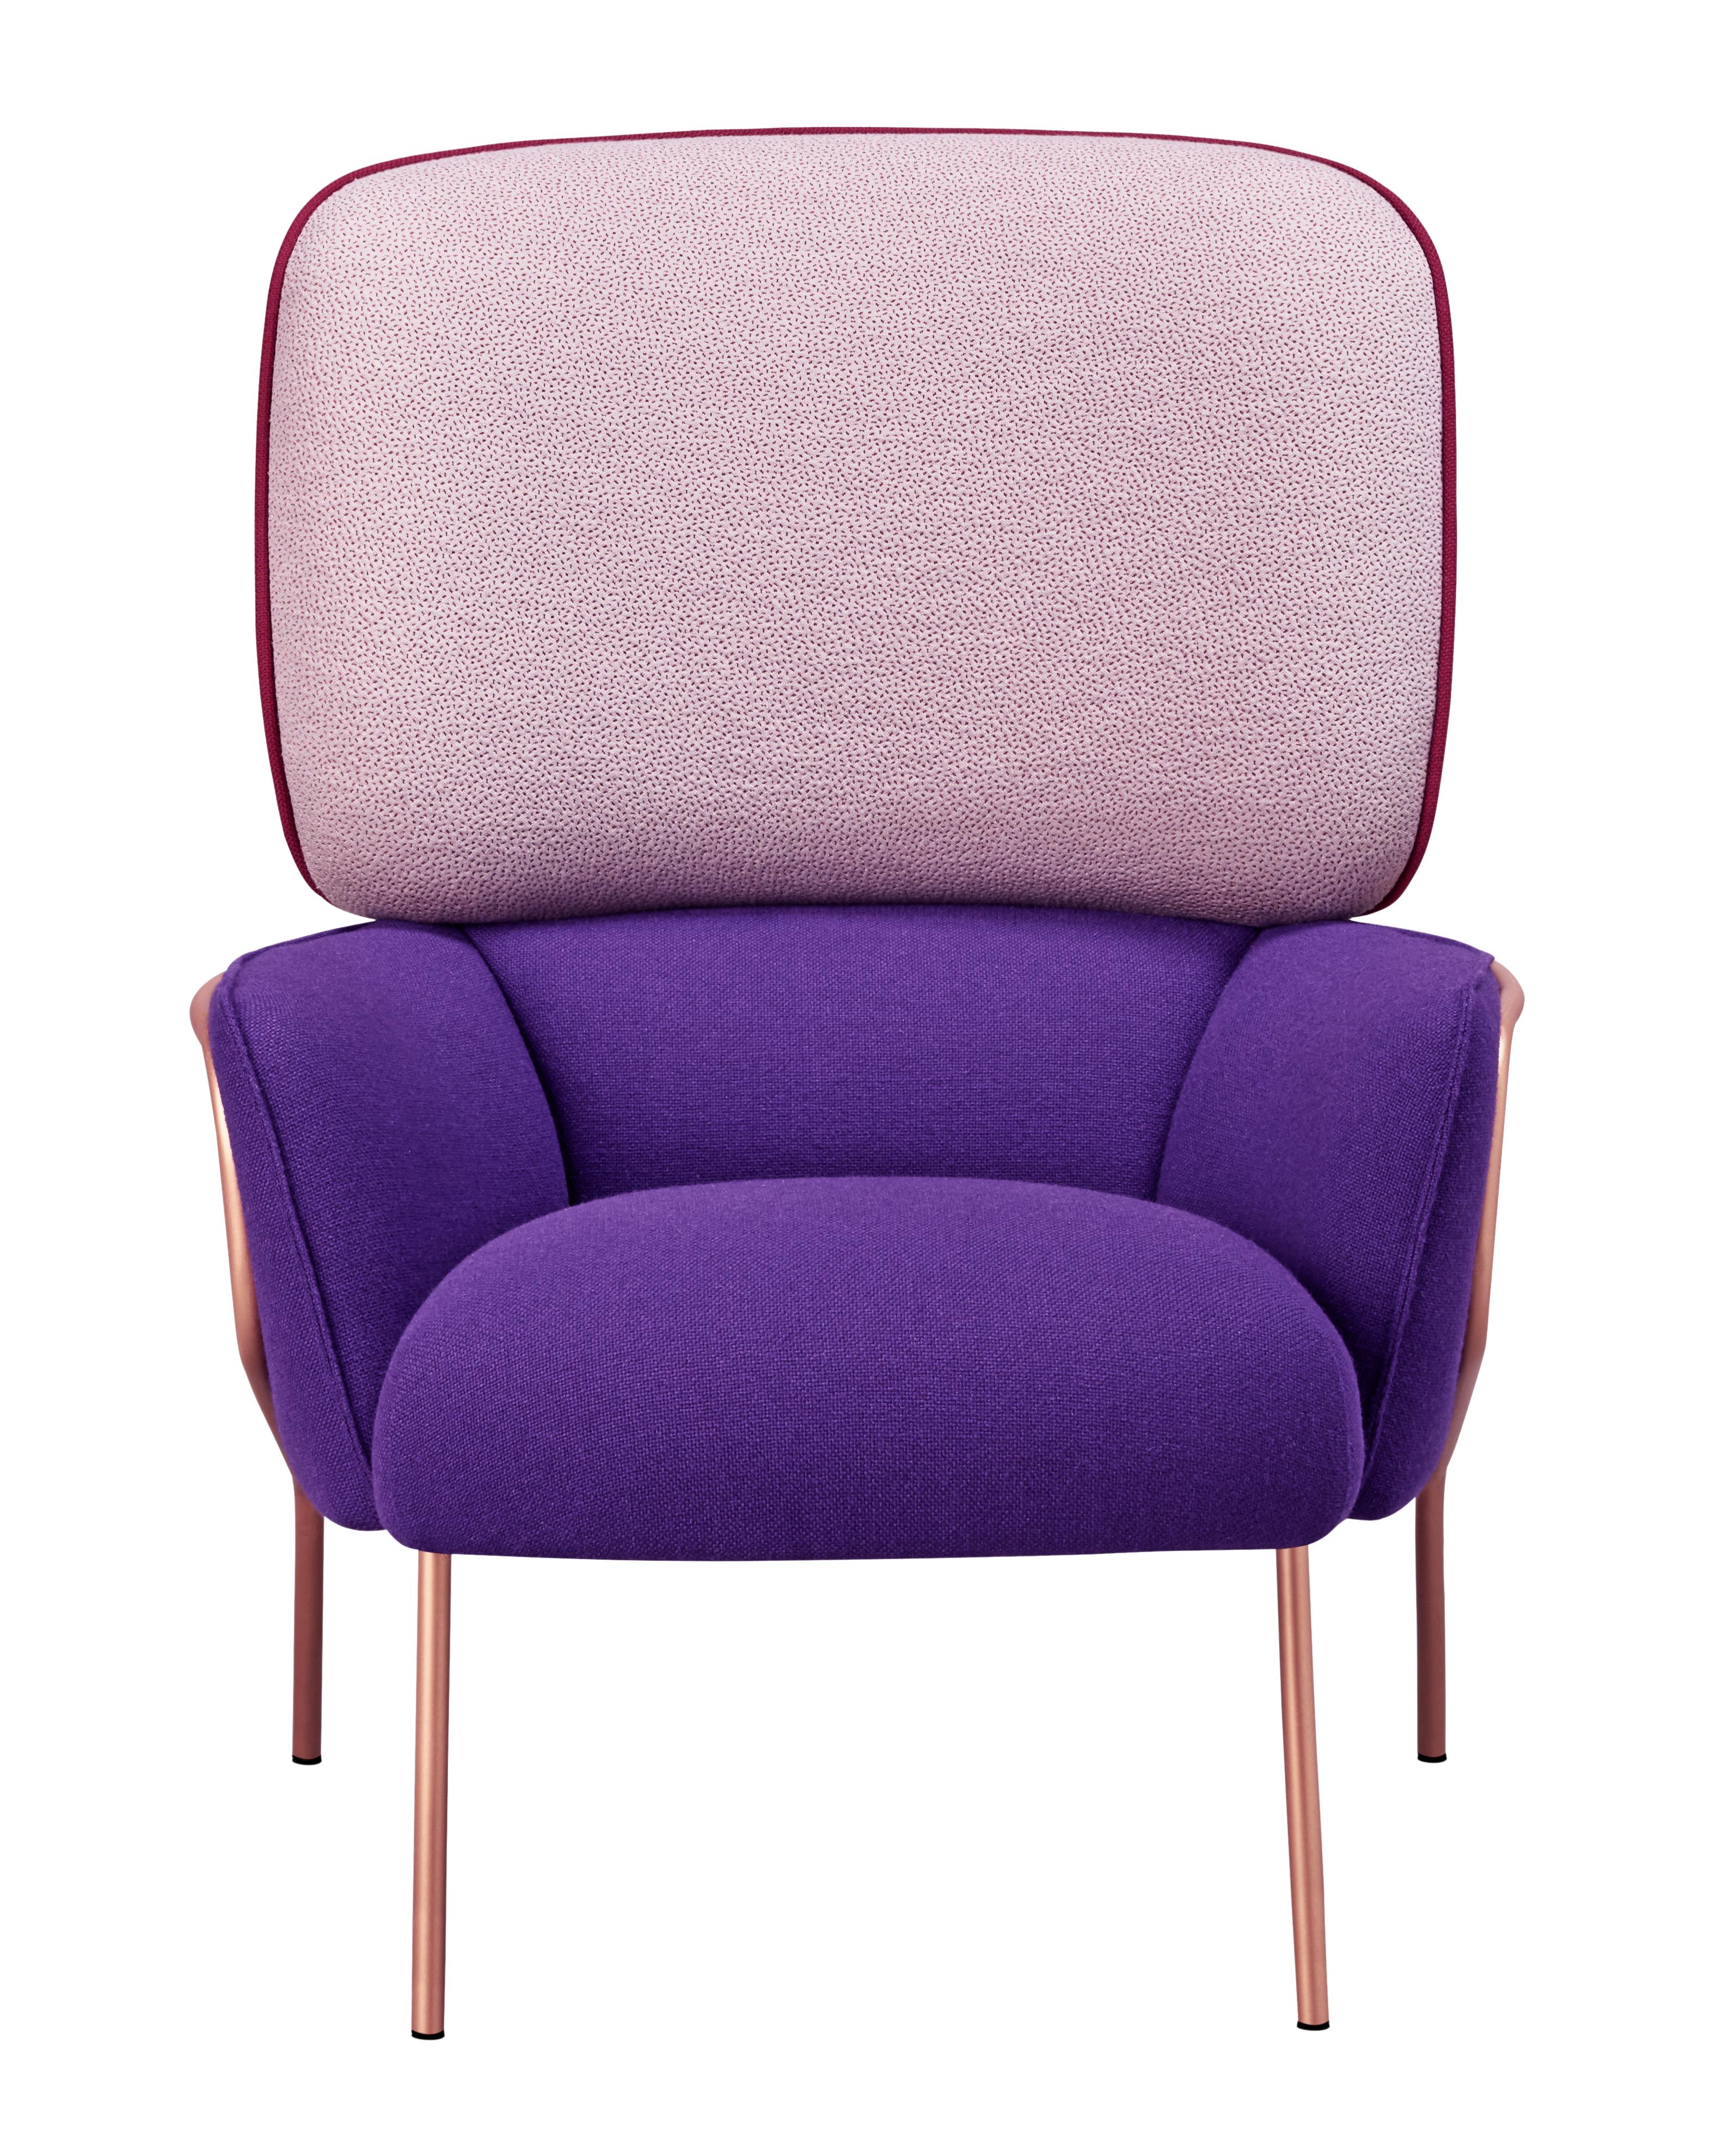 Pair of cotton armchairs, purple by Pepe Albargues
Dimensions: W 78, D 90, H 104, Seat 43
Materials: Pinewood structure reinforced with plywood and tablex
Foam CMHR (high resilience and flame retardant) for all our cushion filling